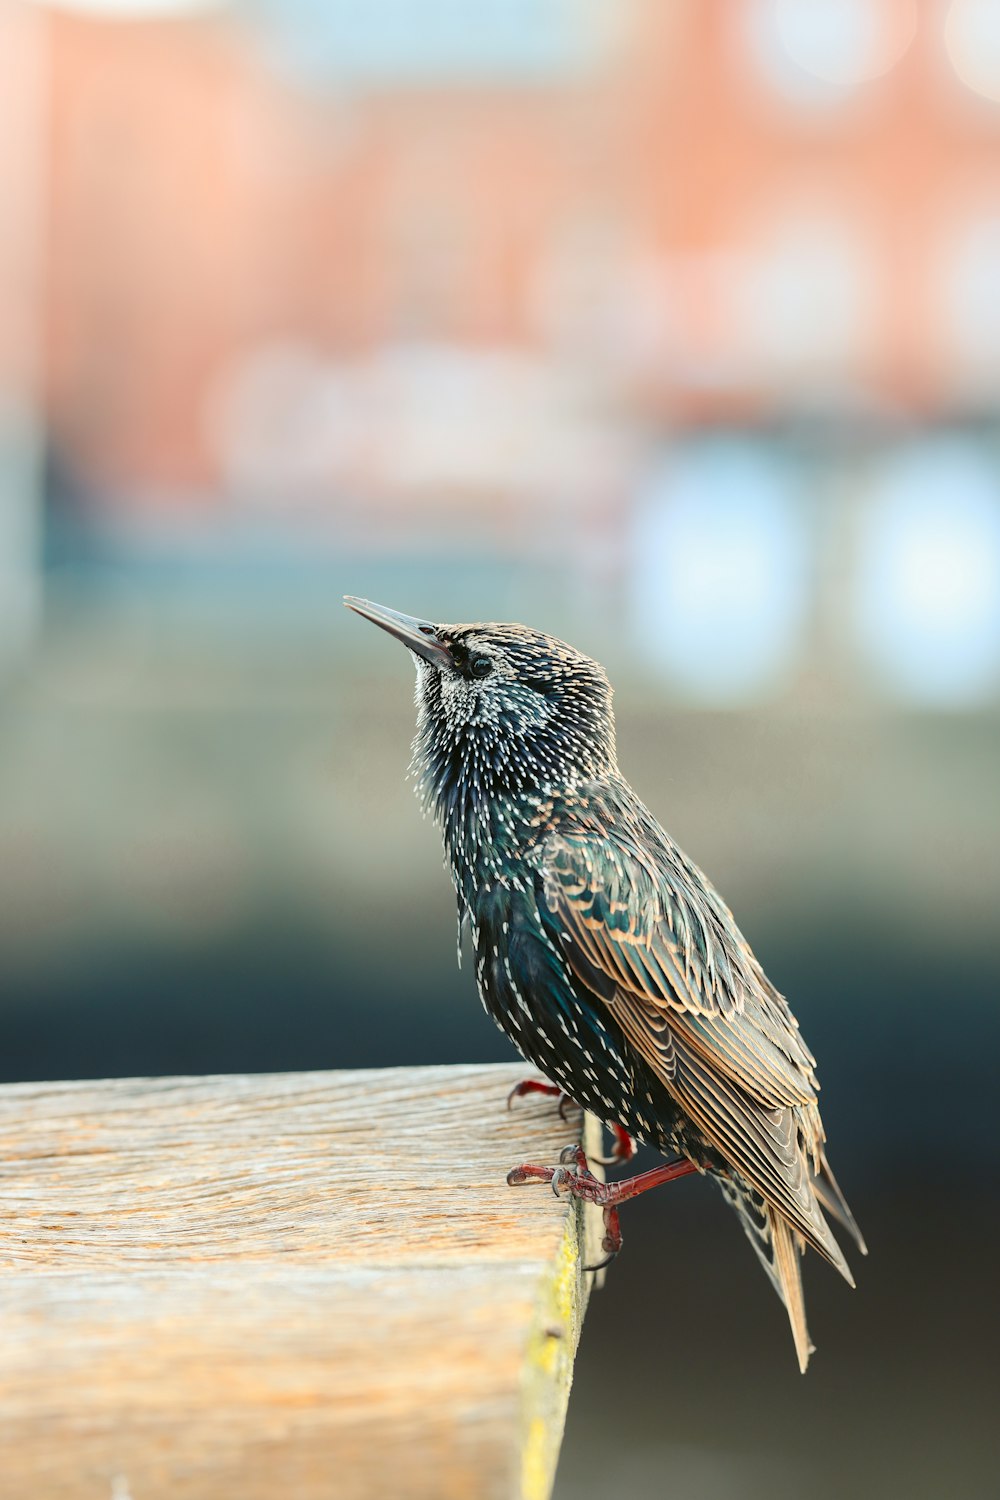 a small bird sitting on top of a wooden bench